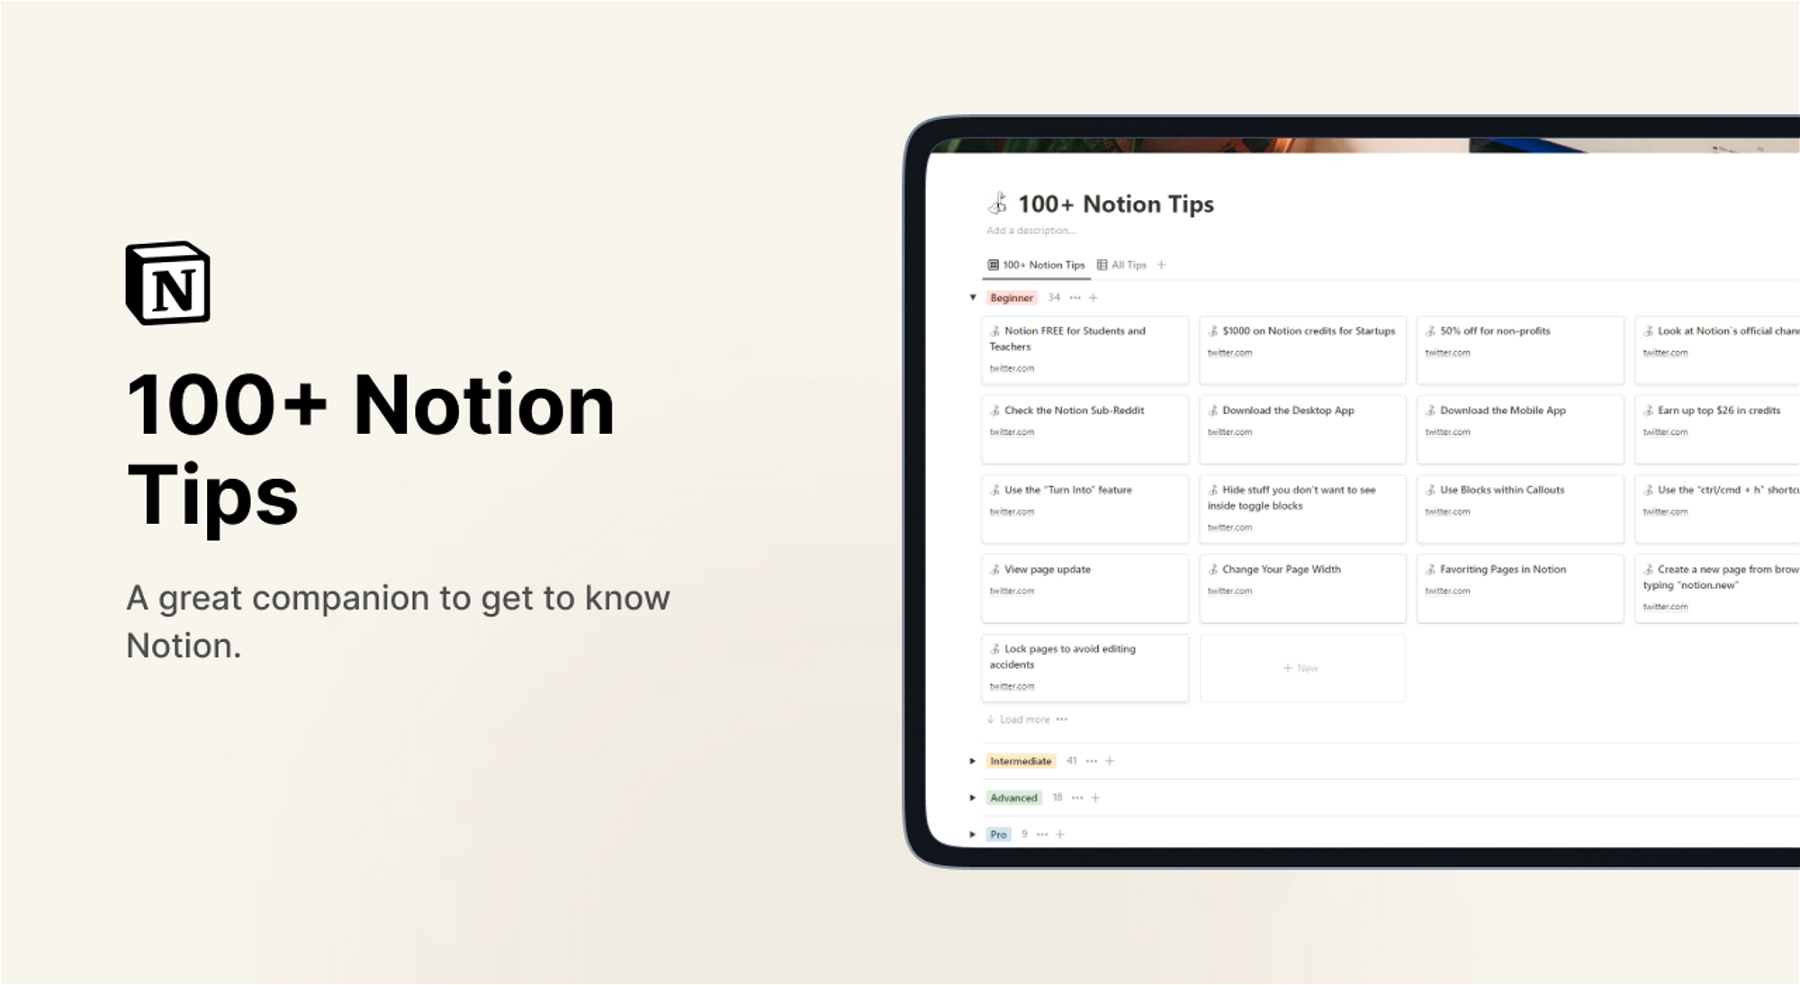 100+ Notion Tips